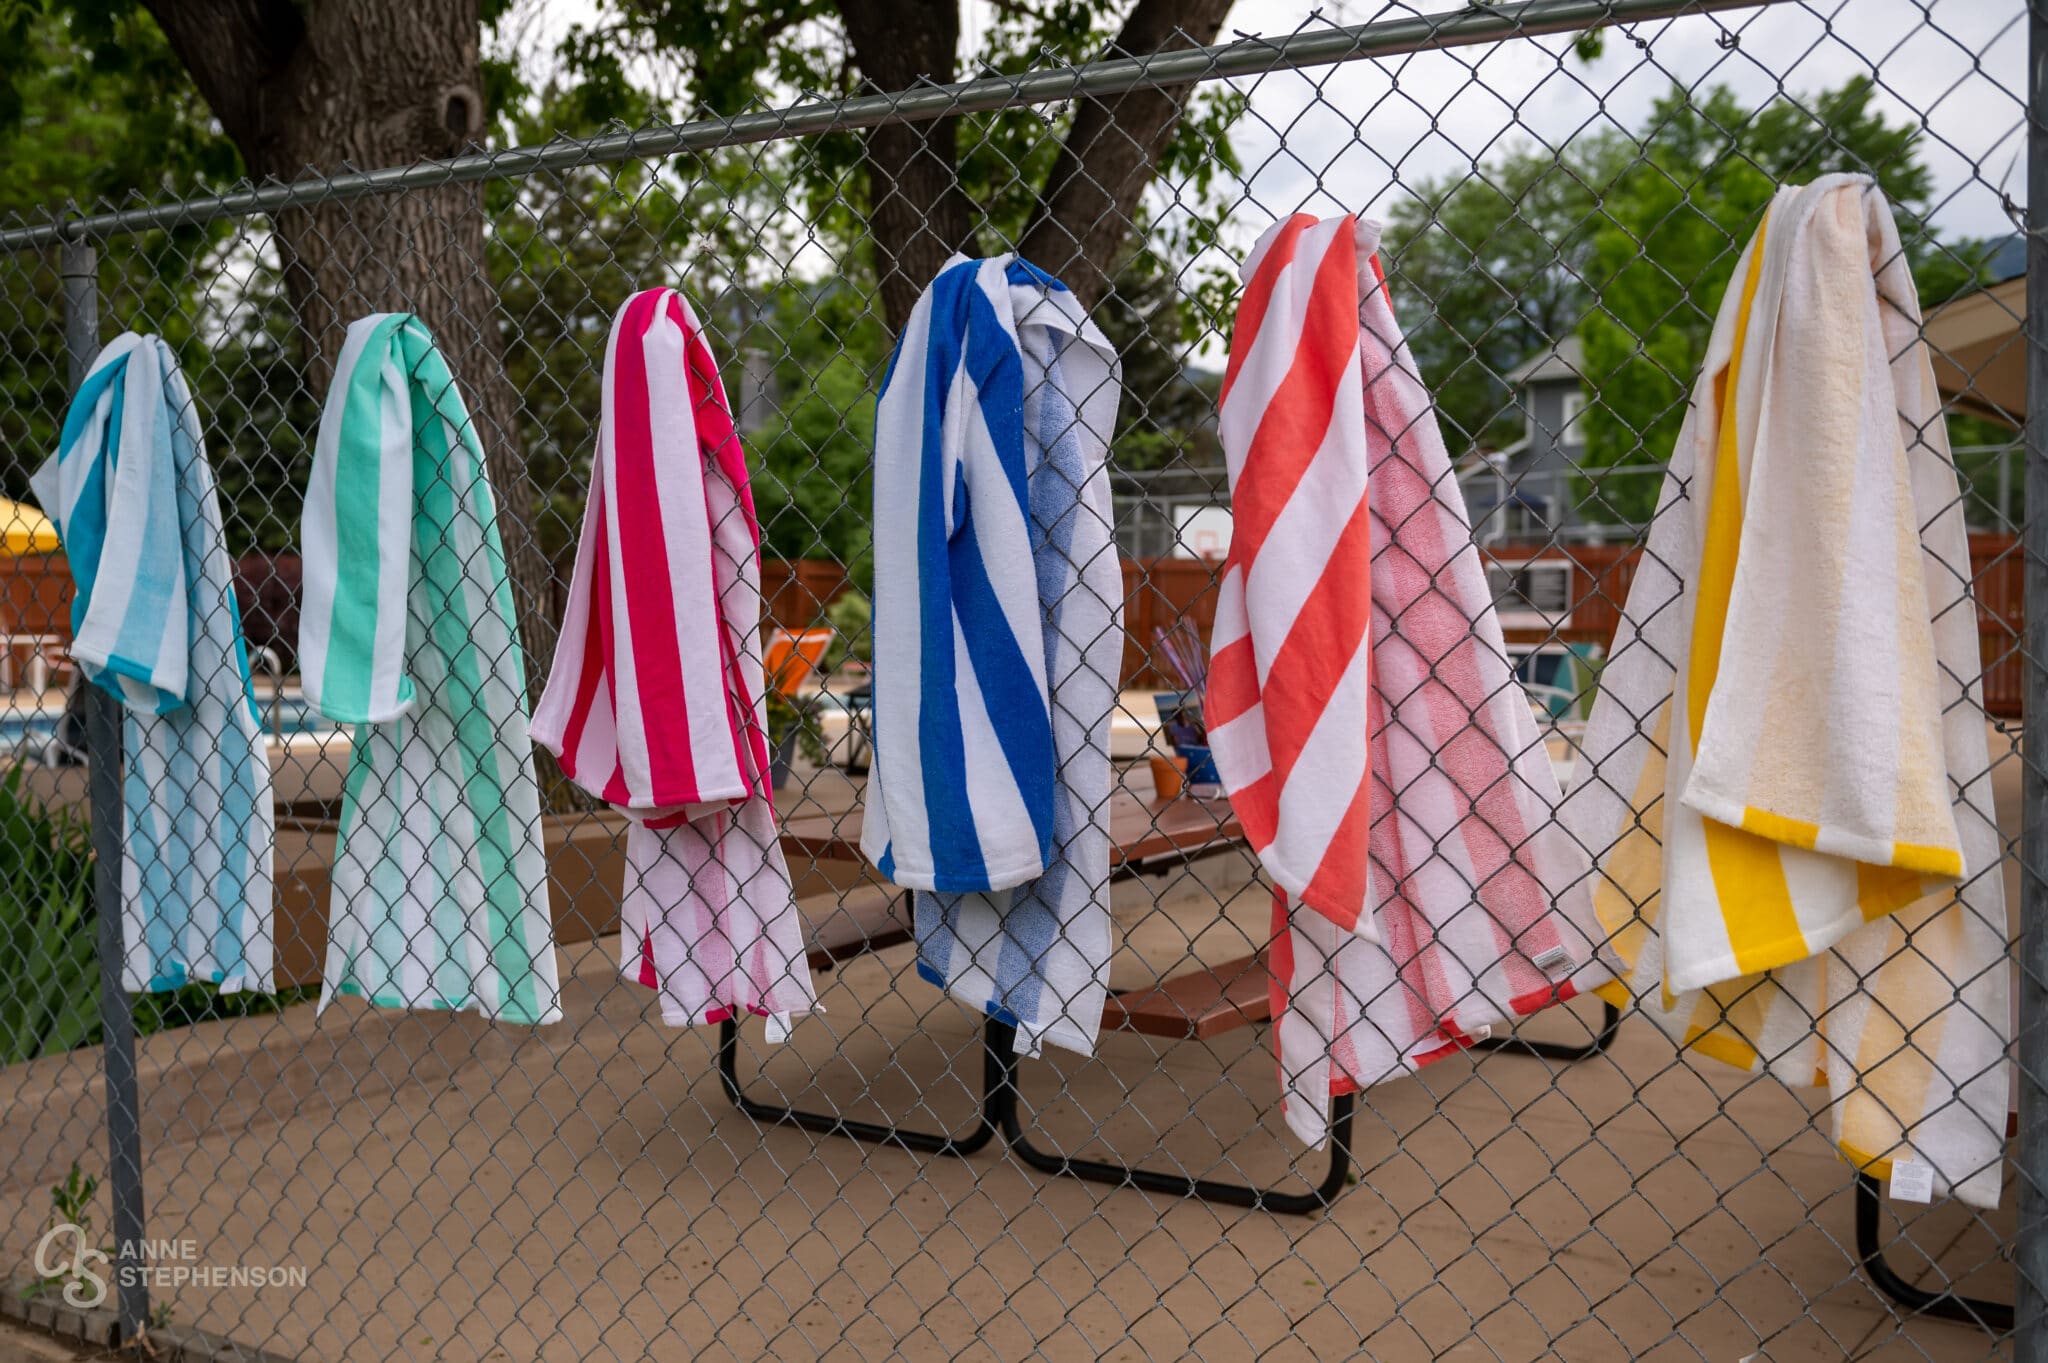 A row of different colored striped beach towels hanging on a chain link fence outside of a pool.